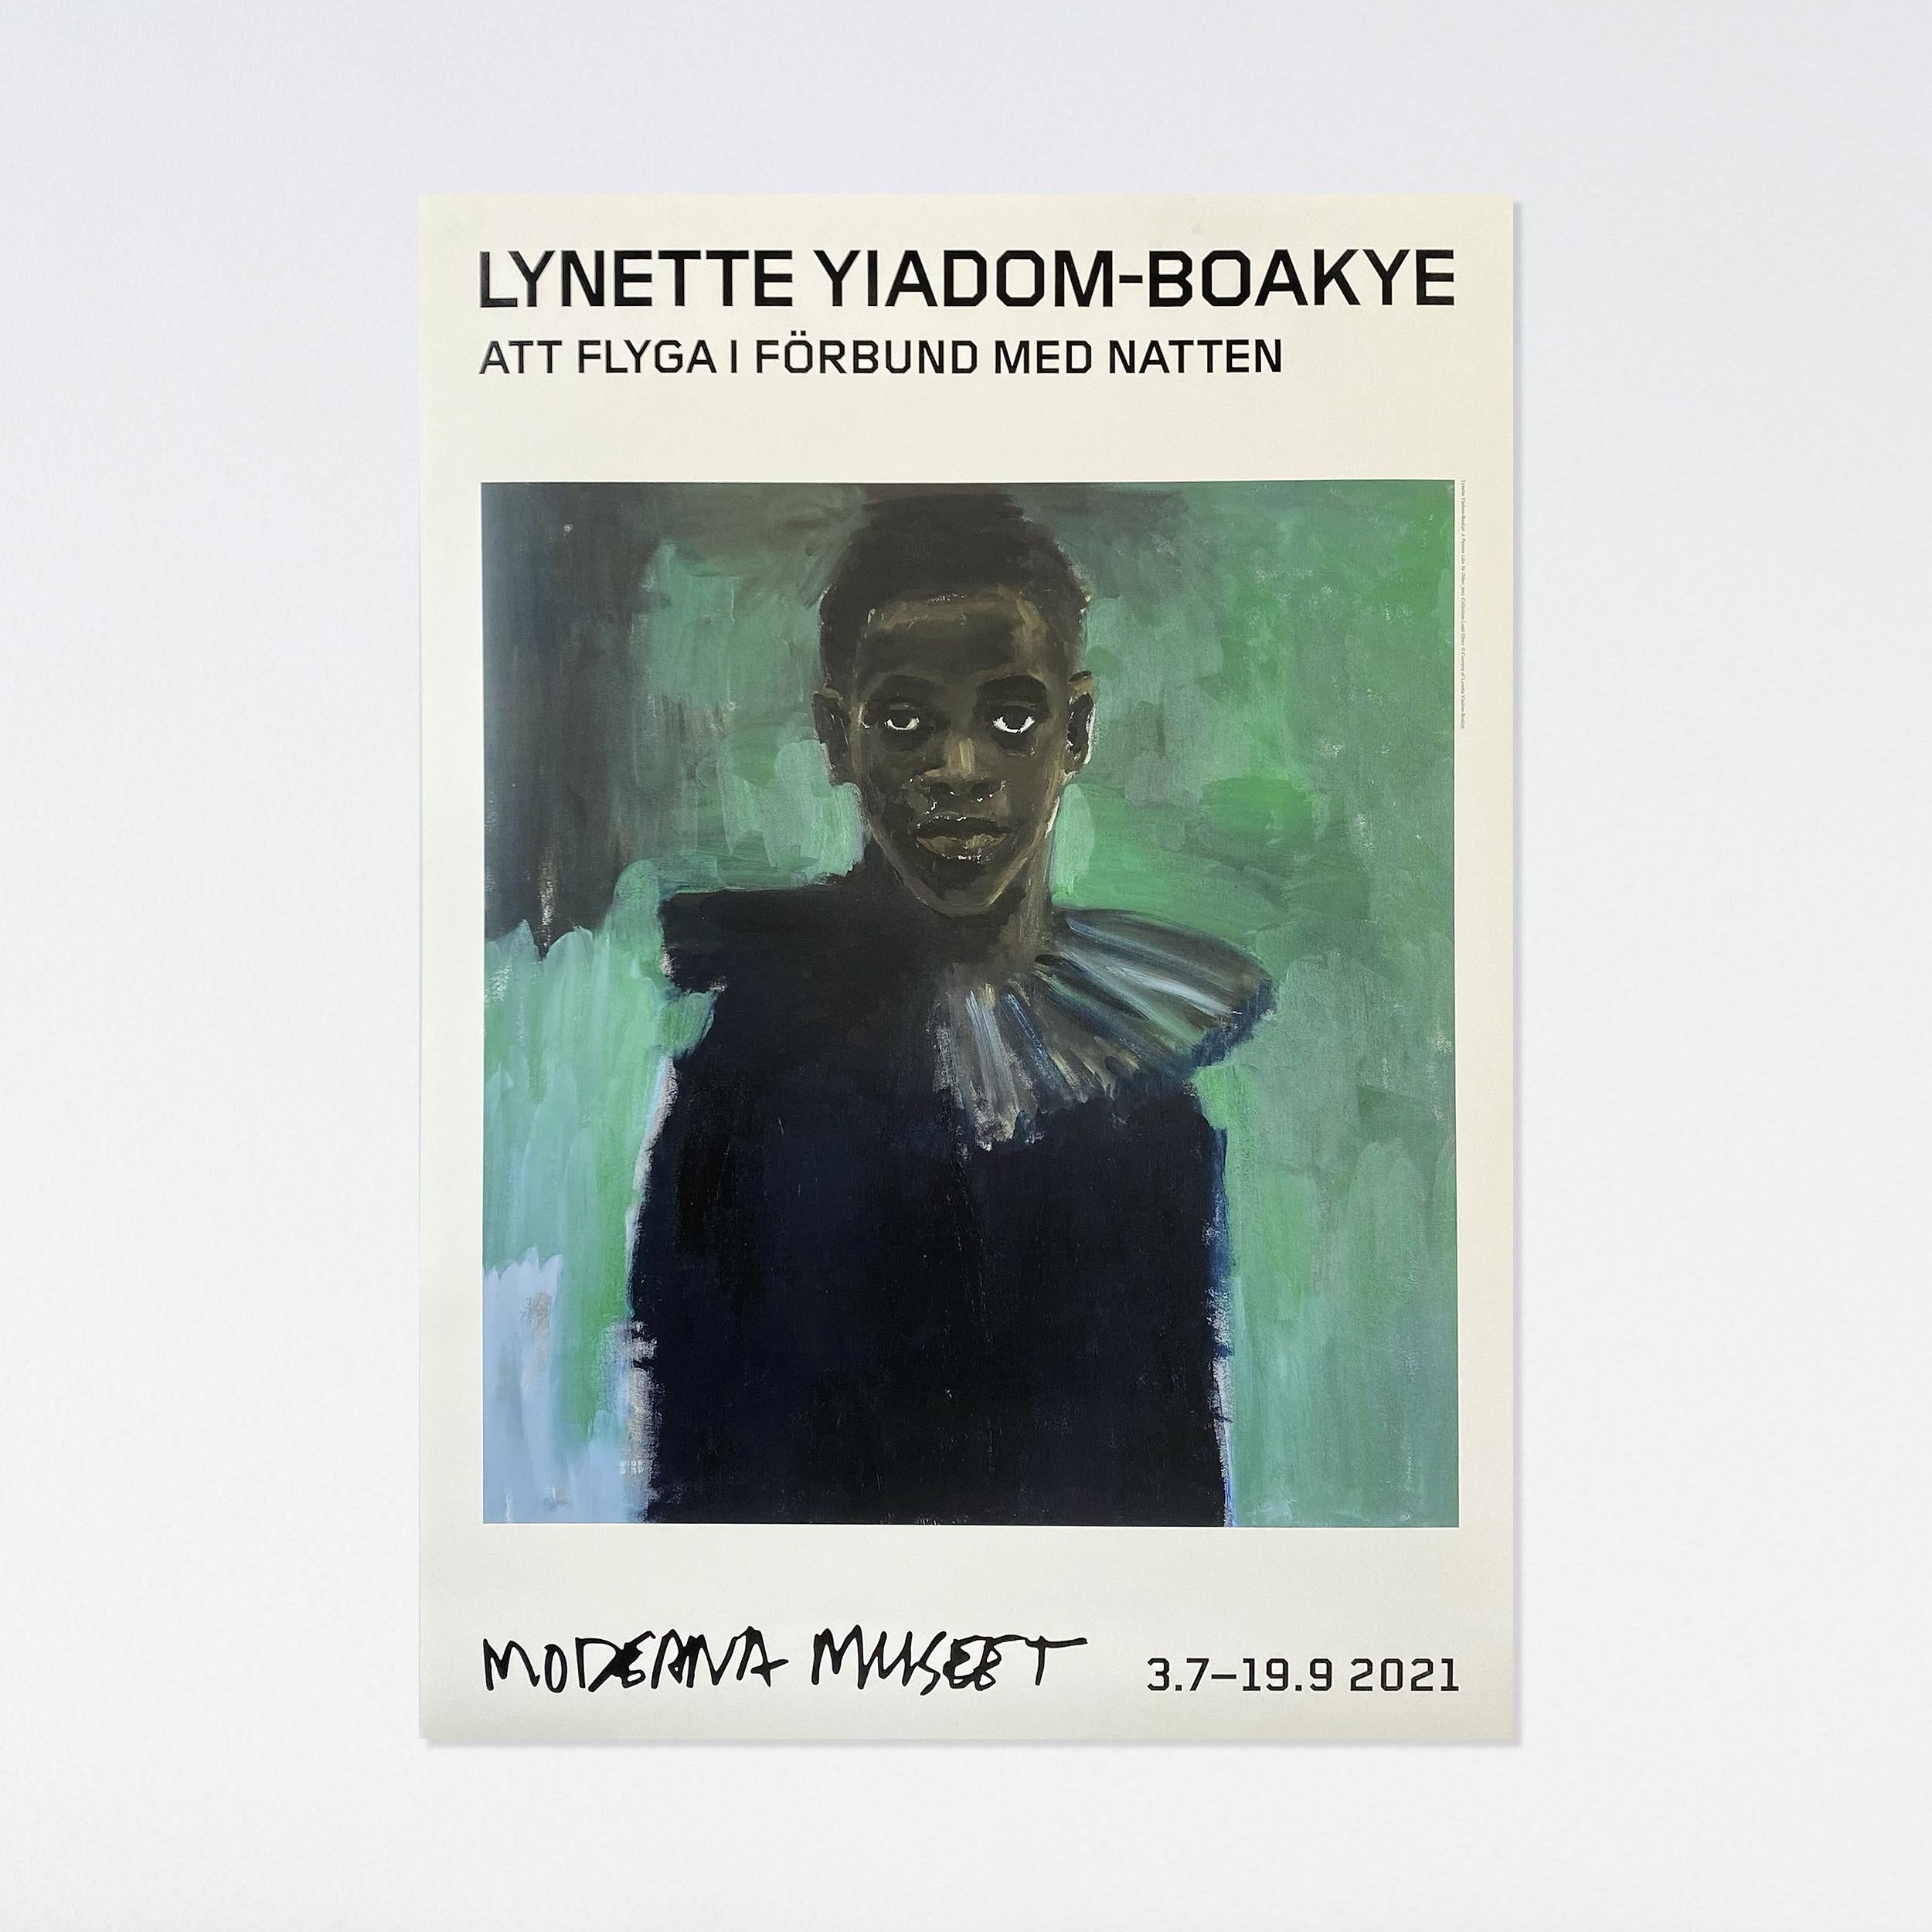 Lynette Yiadom-Boakye, A Passion Like No Other, 2021 Exhibition Poster